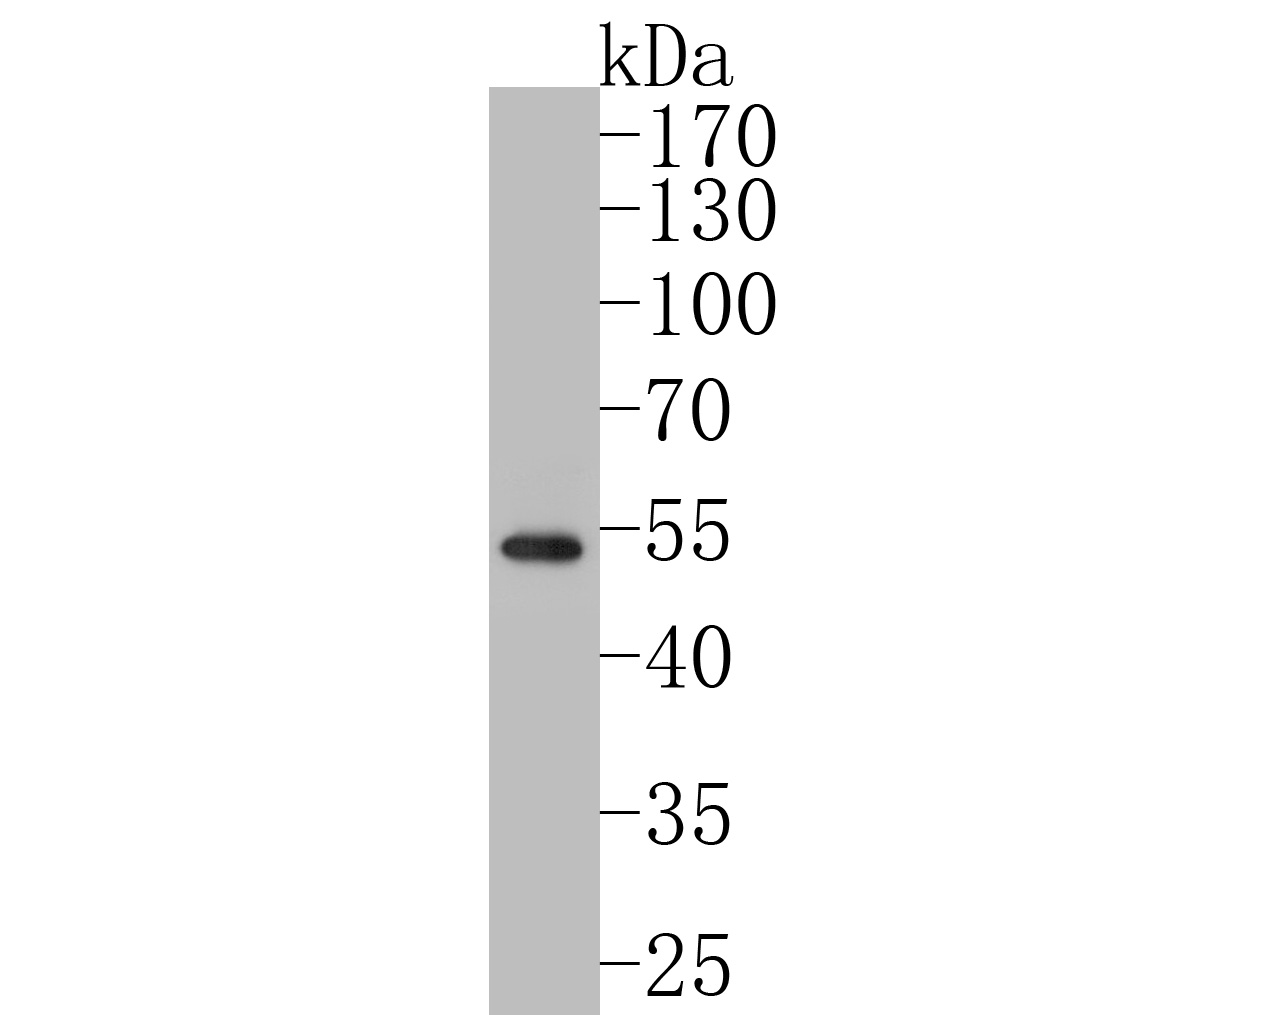 Western blot analysis of GATA3 on SH-SY5Y cell lysates. Proteins were transferred to a PVDF membrane and blocked with 5% BSA in PBS for 1 hour at room temperature. The primary antibody (ER1902-69, 1/500) was used in 5% BSA at room temperature for 2 hours. Goat Anti-Rabbit IgG - HRP Secondary Antibody (HA1001) at 1:5,000 dilution was used for 1 hour at room temperature.